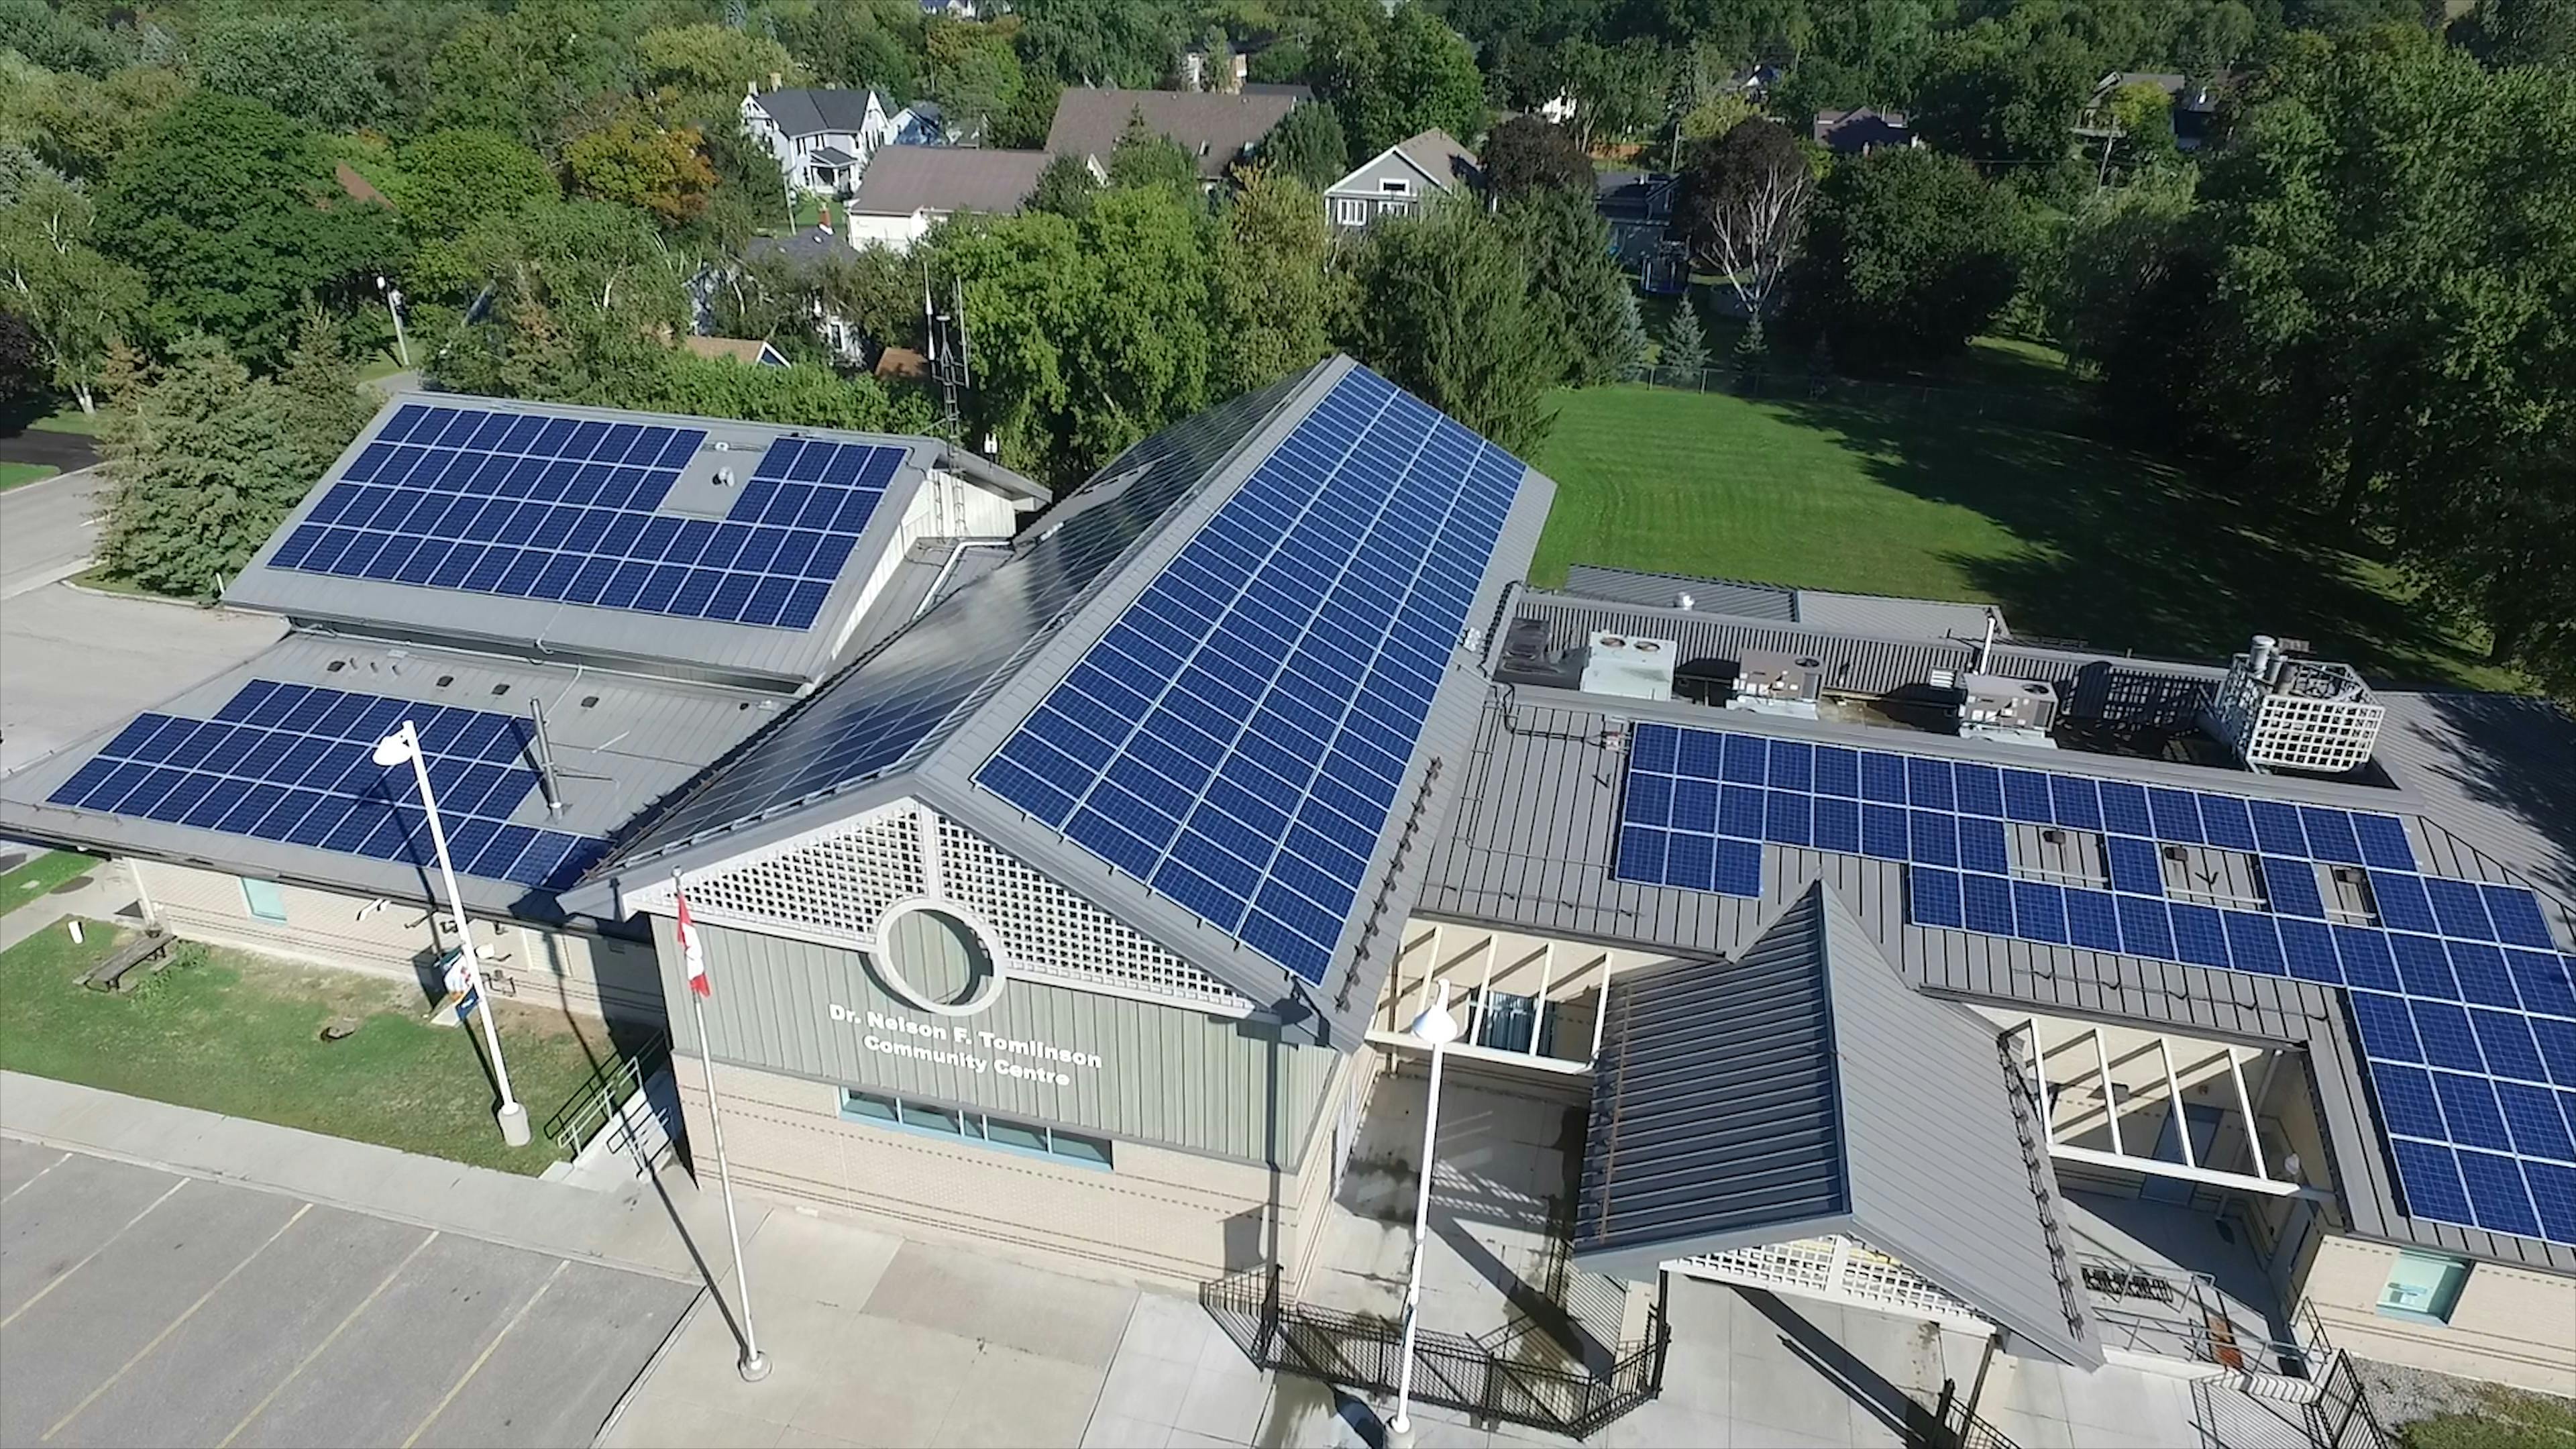 City of Pickering's Dr. Nelson Tomlinson Community Centre - Solar Panel Roof